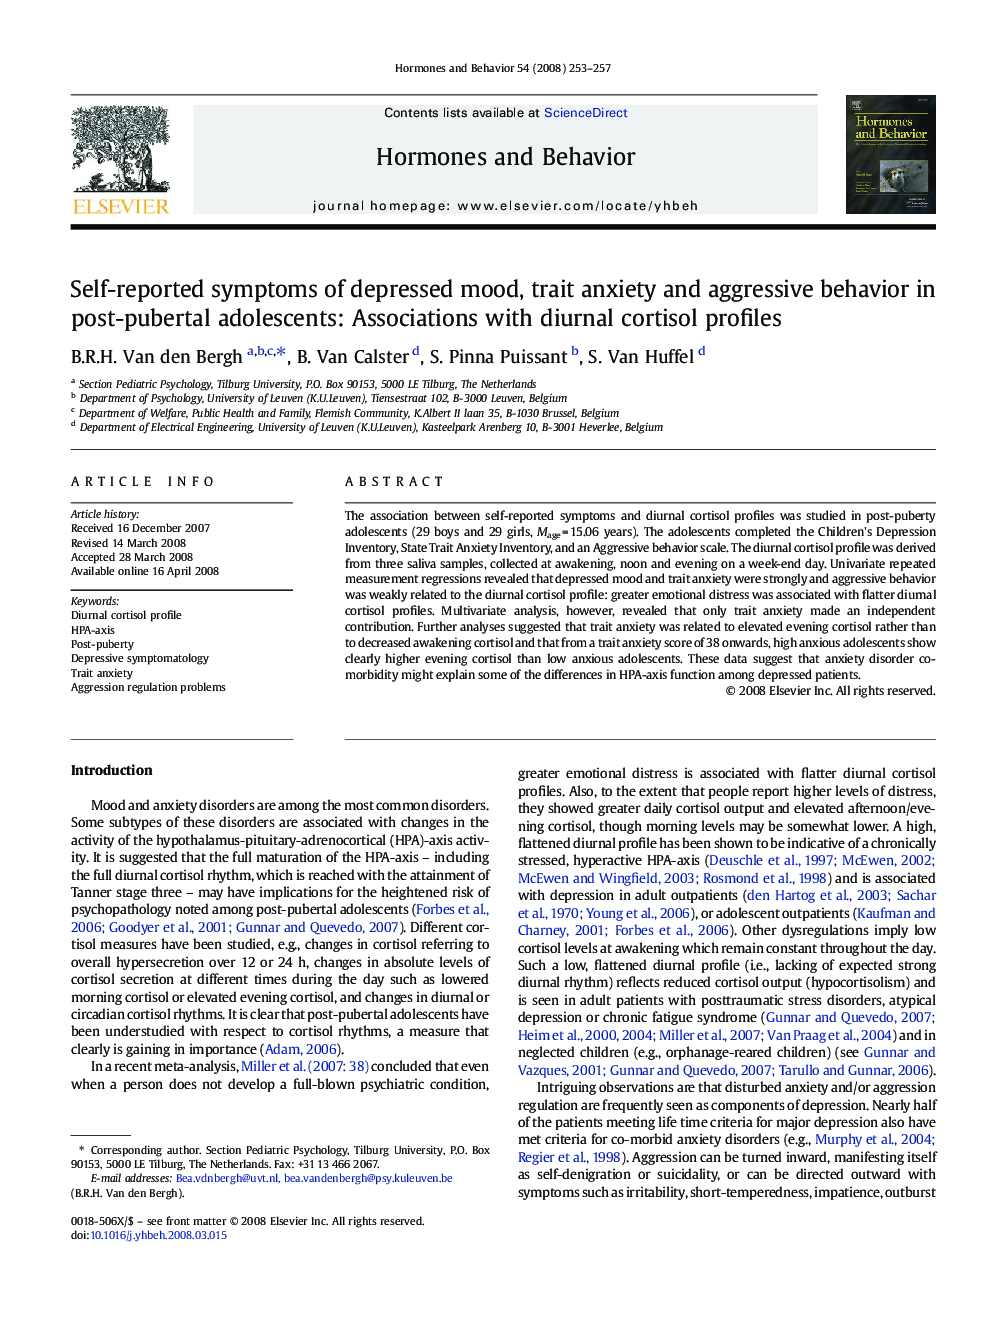 Self-reported symptoms of depressed mood, trait anxiety and aggressive behavior in post-pubertal adolescents: Associations with diurnal cortisol profiles